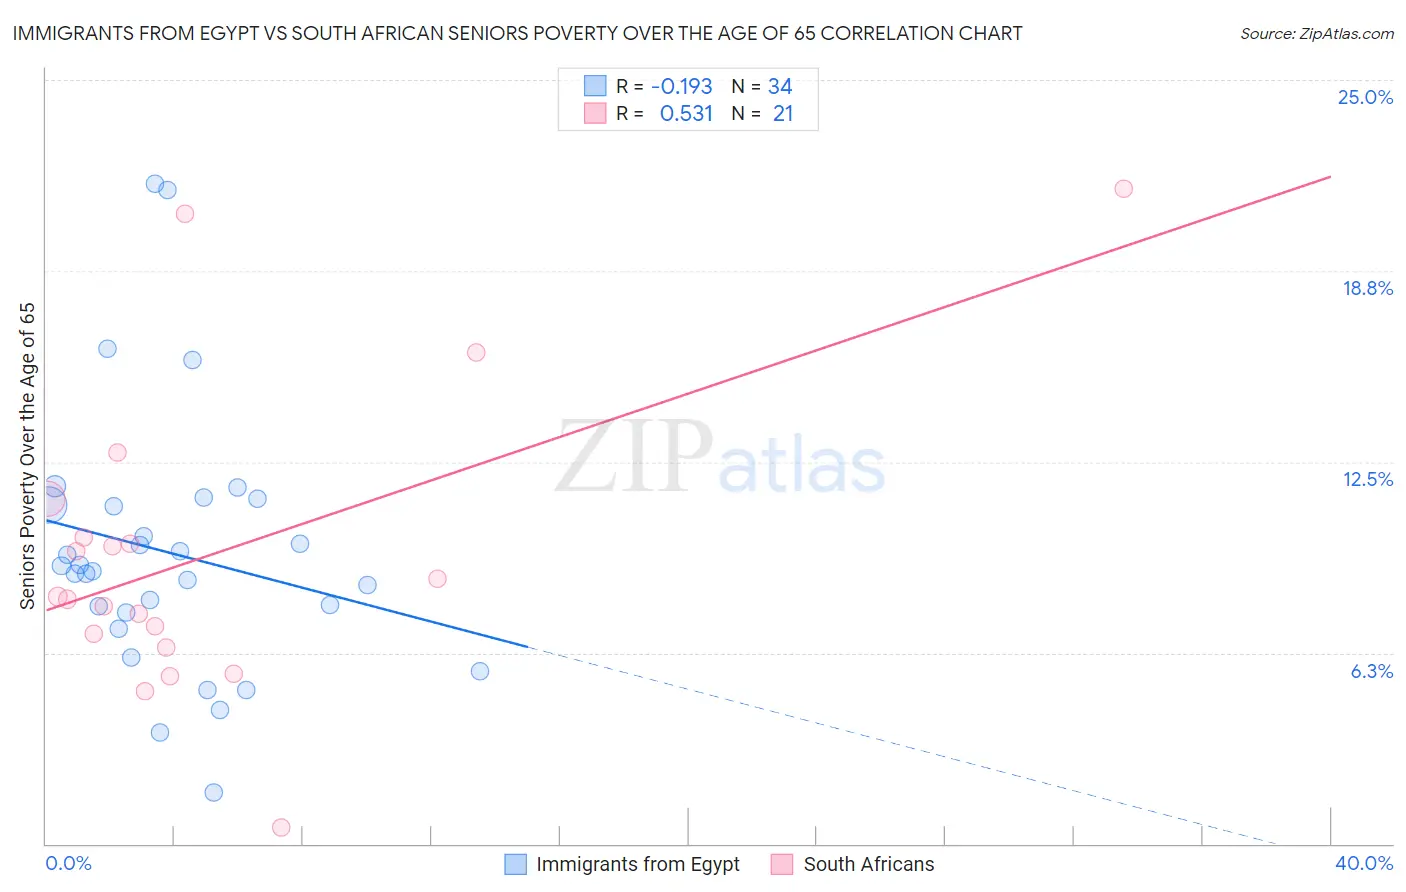 Immigrants from Egypt vs South African Seniors Poverty Over the Age of 65